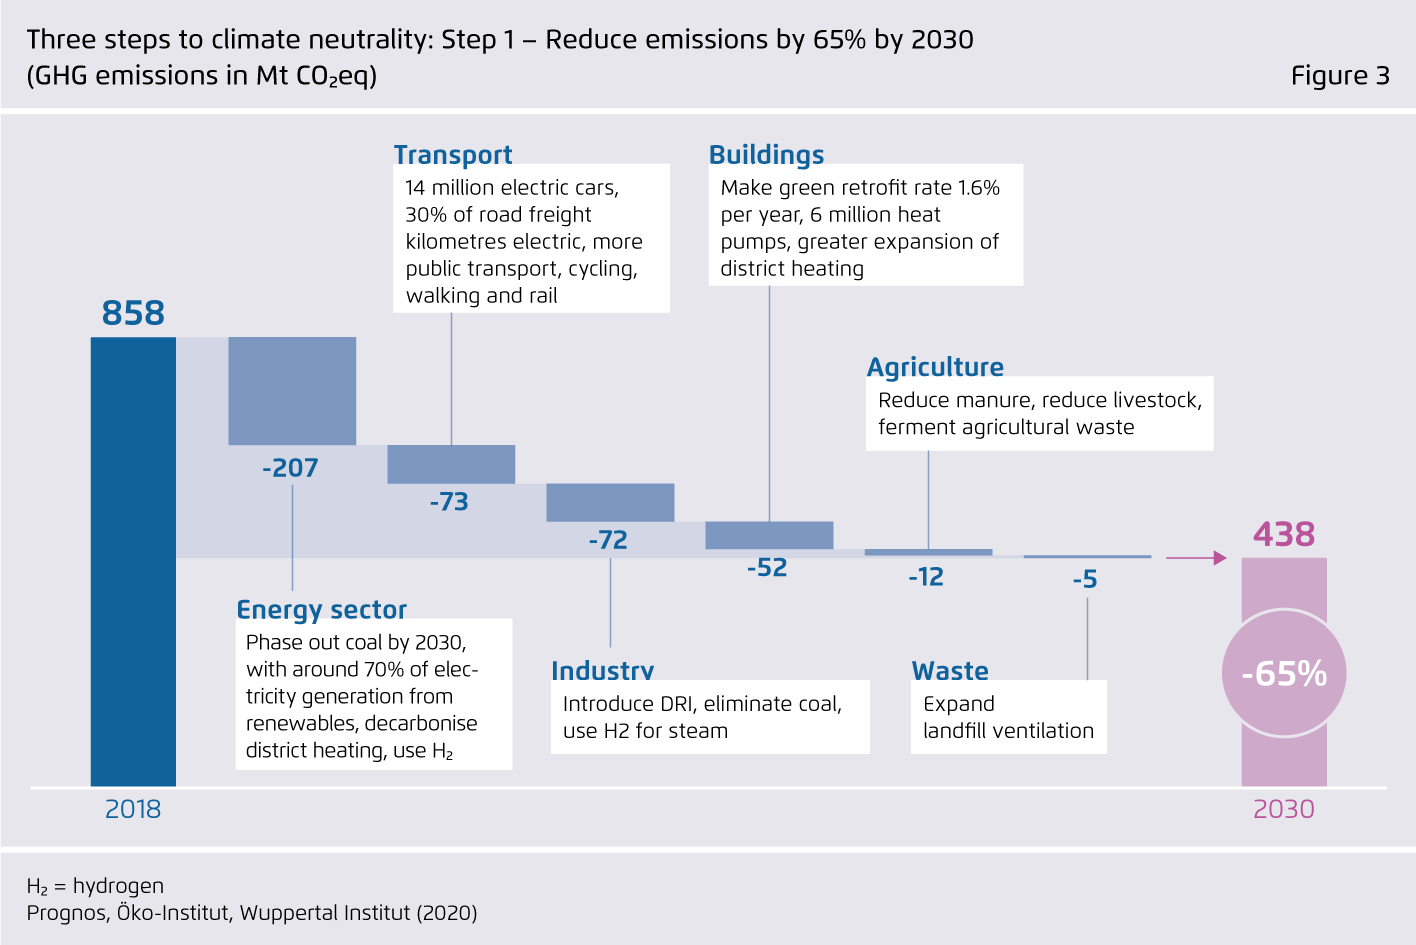 Preview for Three steps to climate neutrality: Step 1 – Reduce emissions by 65% by 2030 (GHG emissions in Mt CO₂eq)